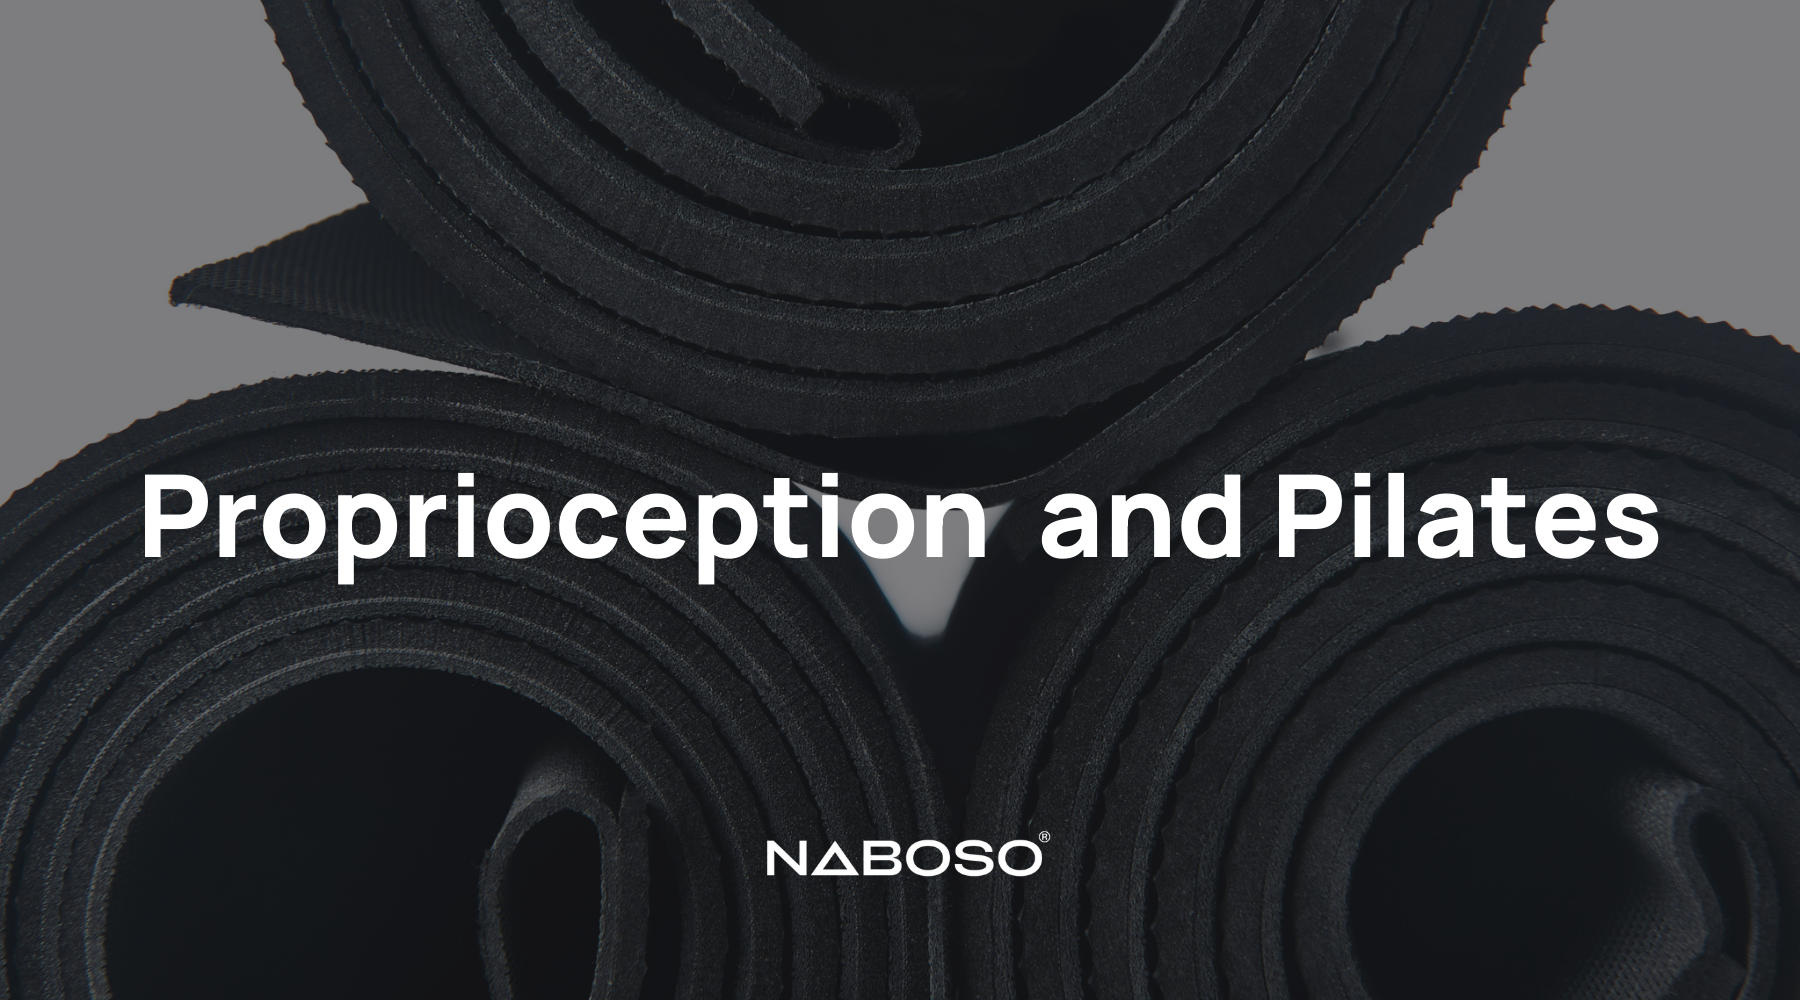 Proprioception and Pilates